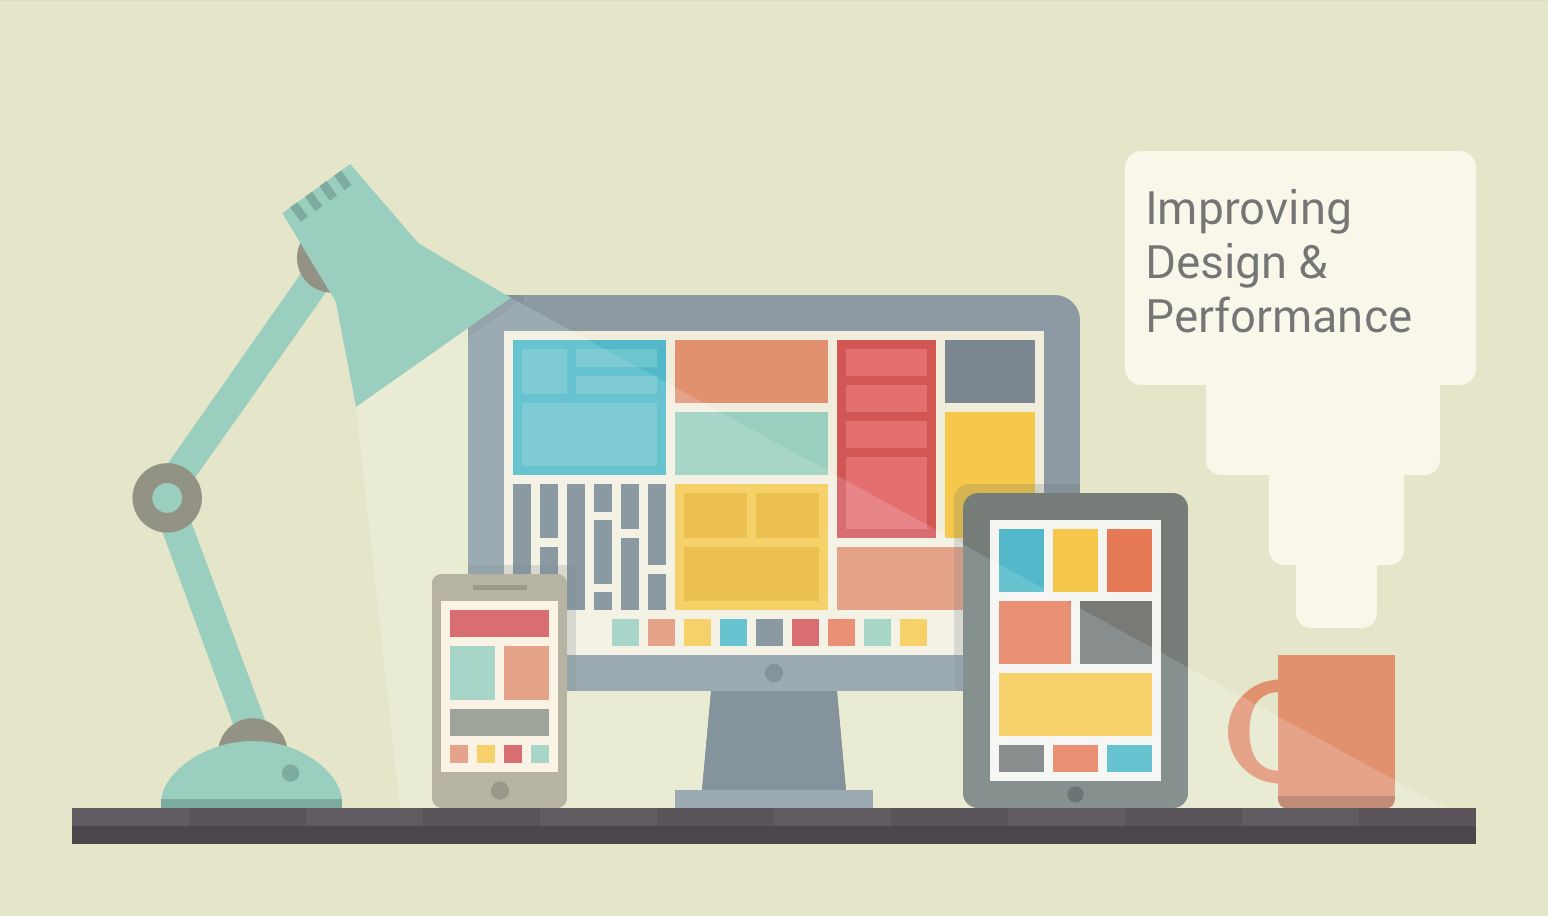 How an improved responsive design and faster site increased visitor engagement by 104%